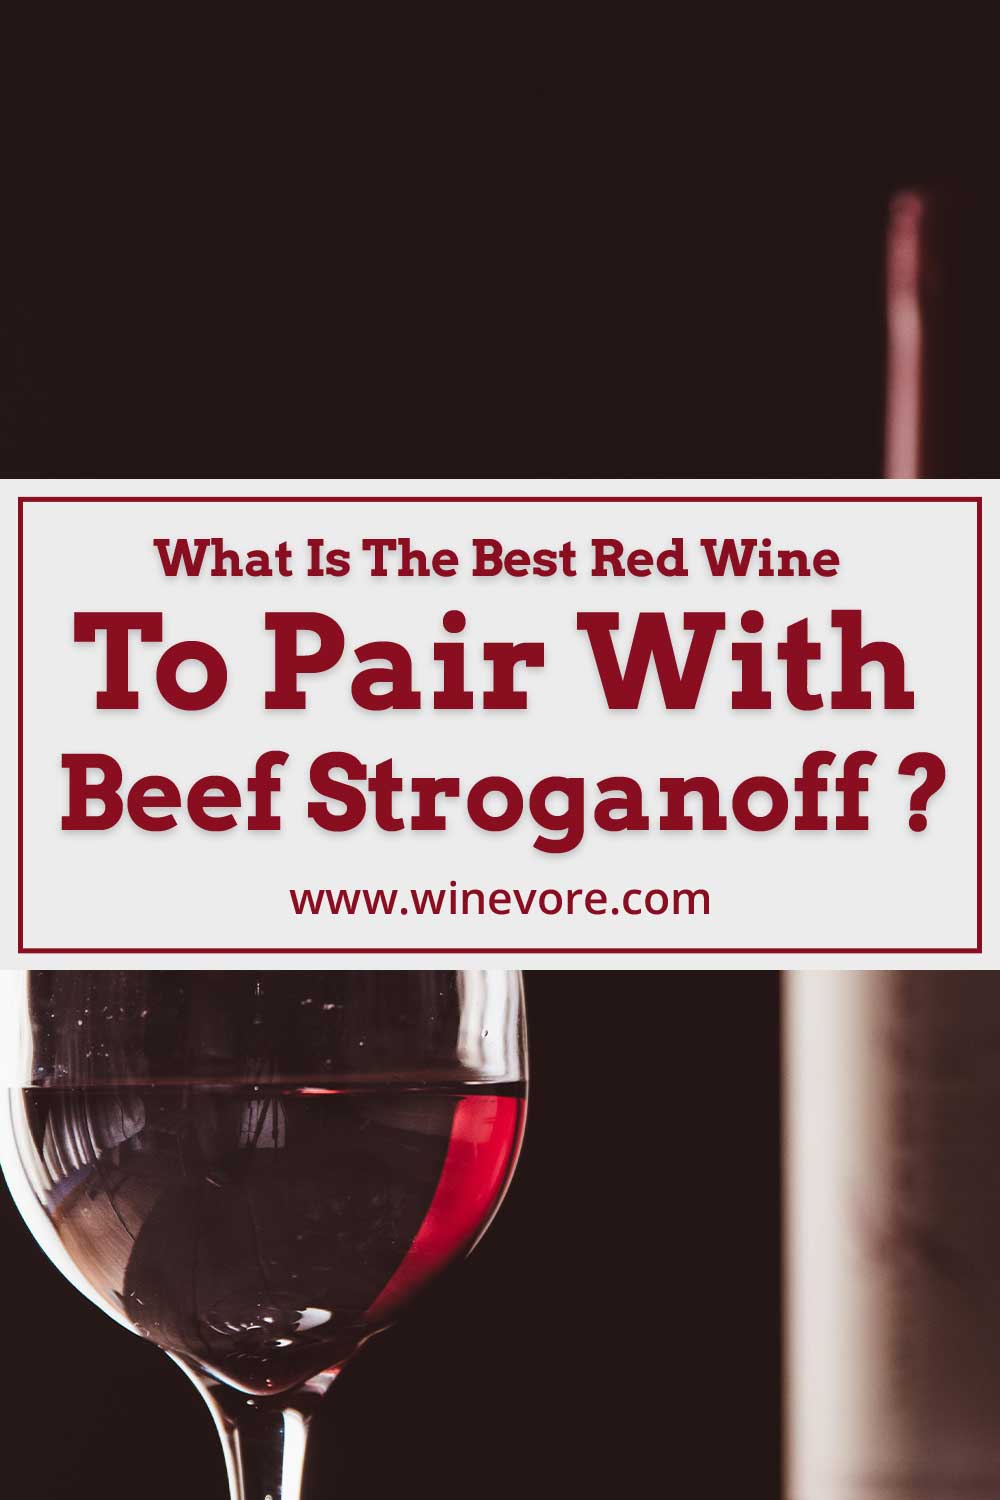 A wine glass in front of a wine bottle - What Is The Best Red Wine To Pair With Beef Stroganoff ?